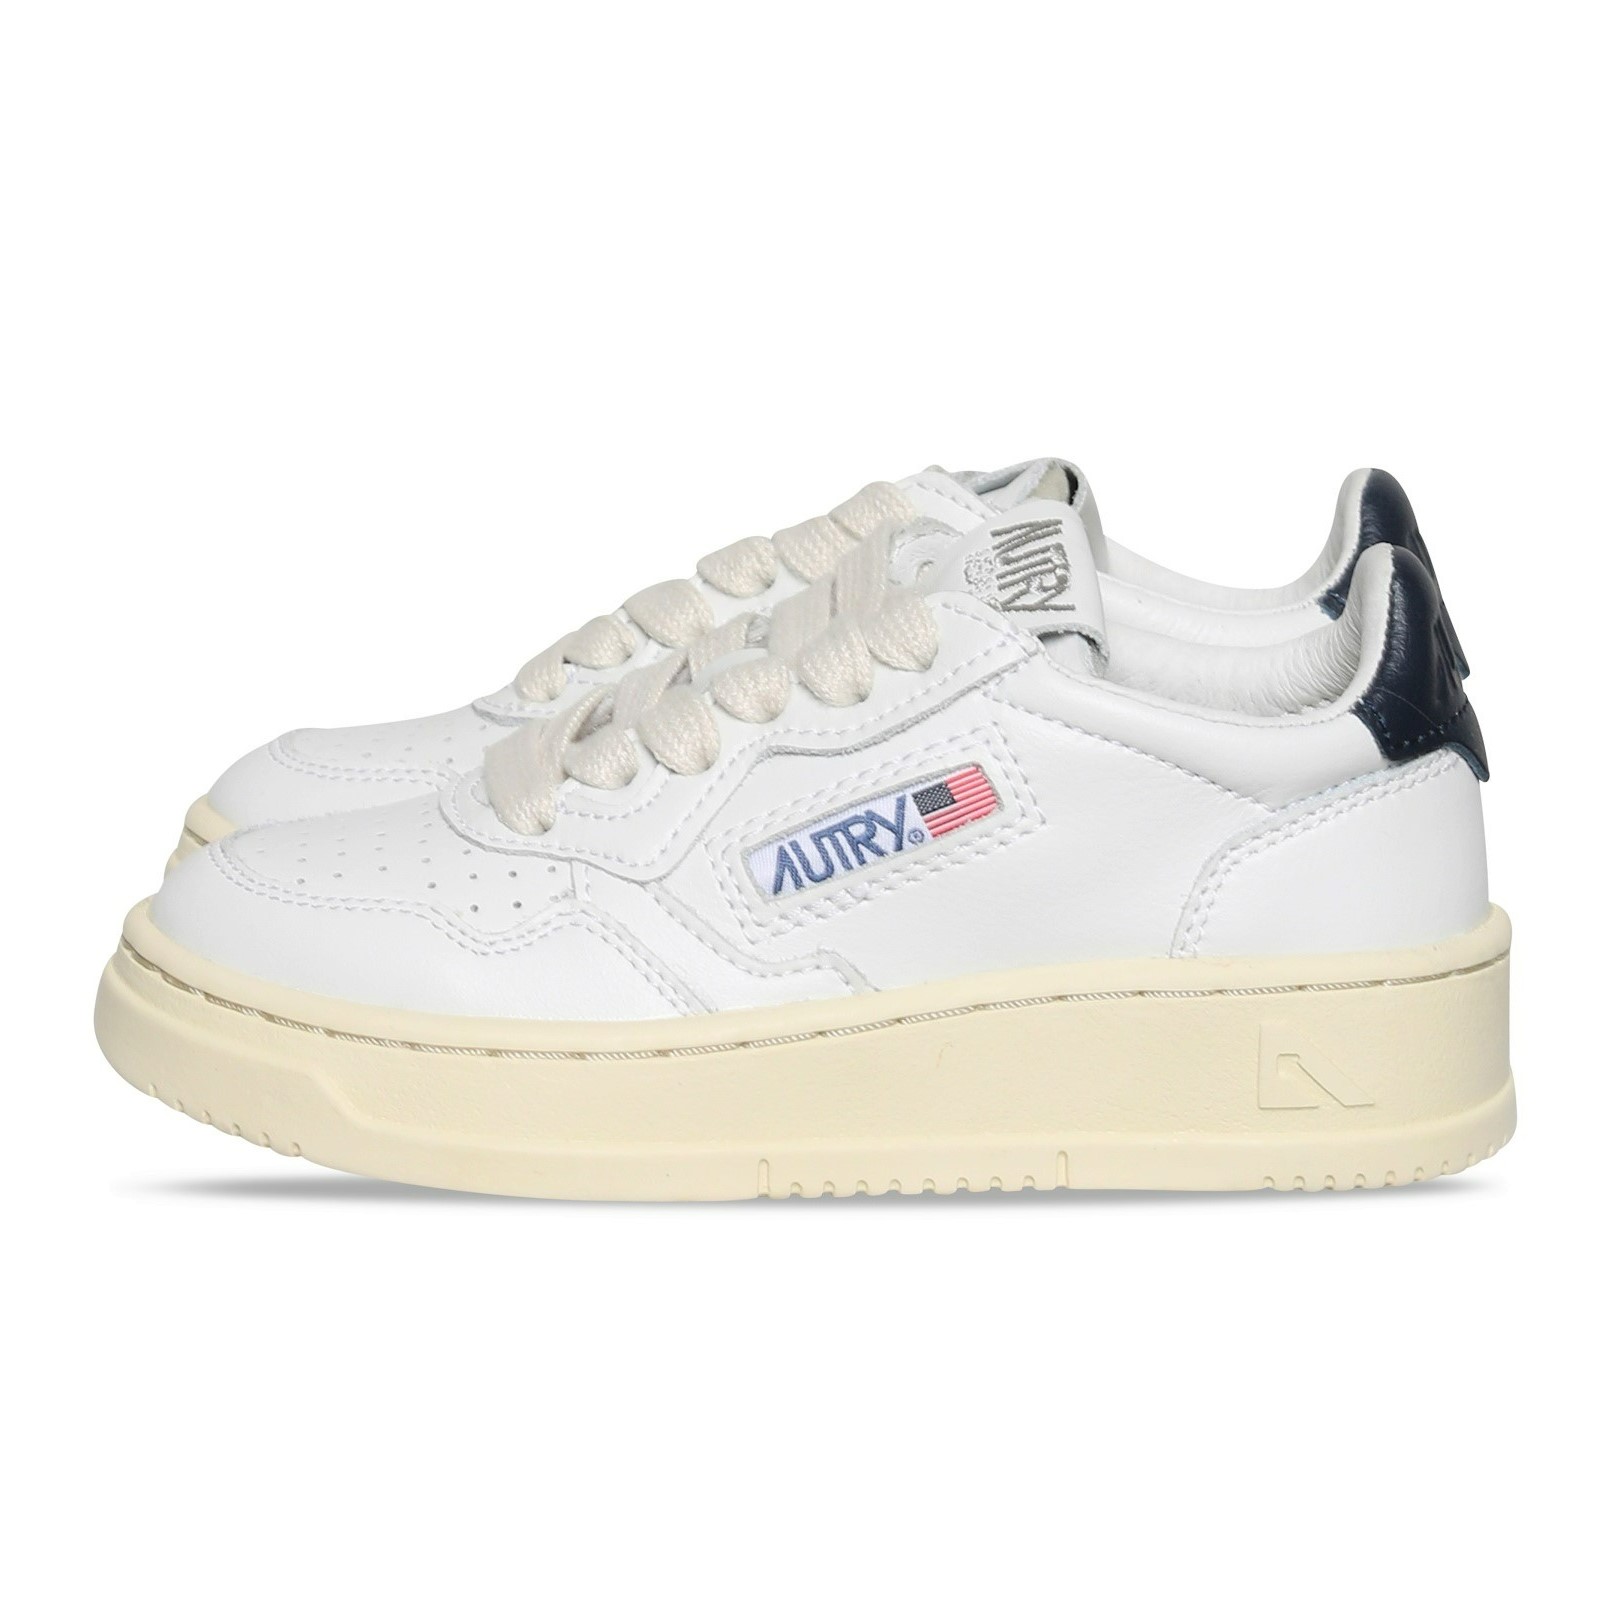 -KIDS- AUTRY ACTION SHOES Low Sneaker in White/Blue